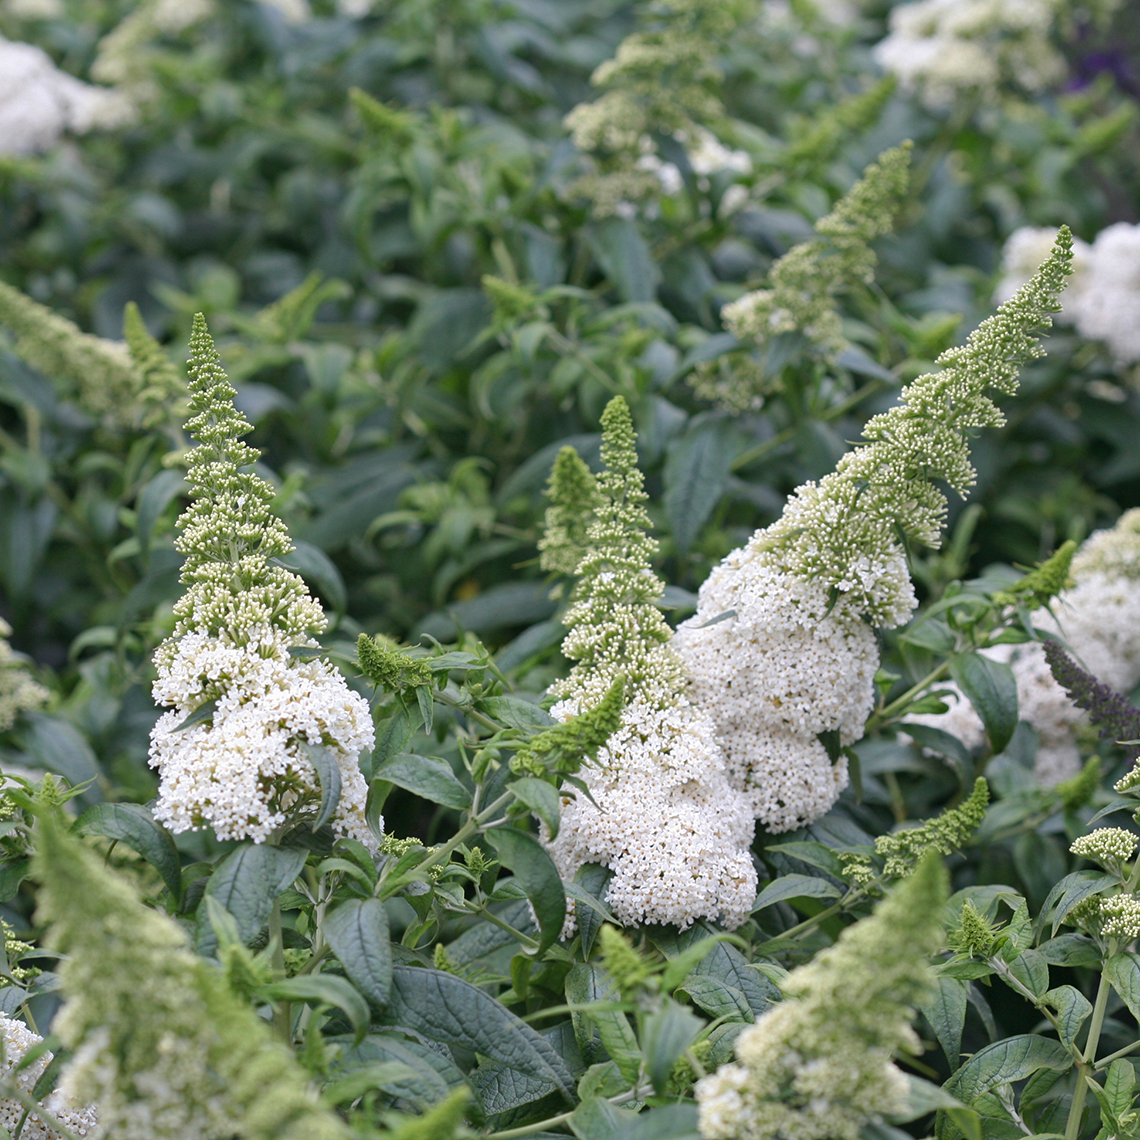 Close up of the large white Pugster White Buddleia flowers